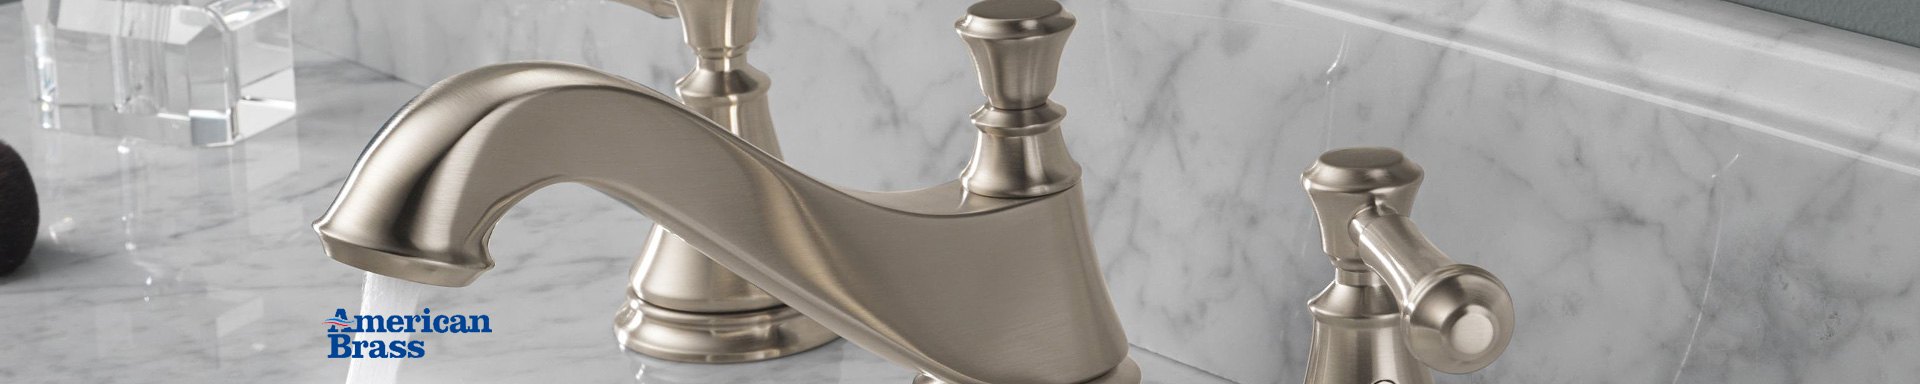 American Brass RV Faucets & Shower Fixtures